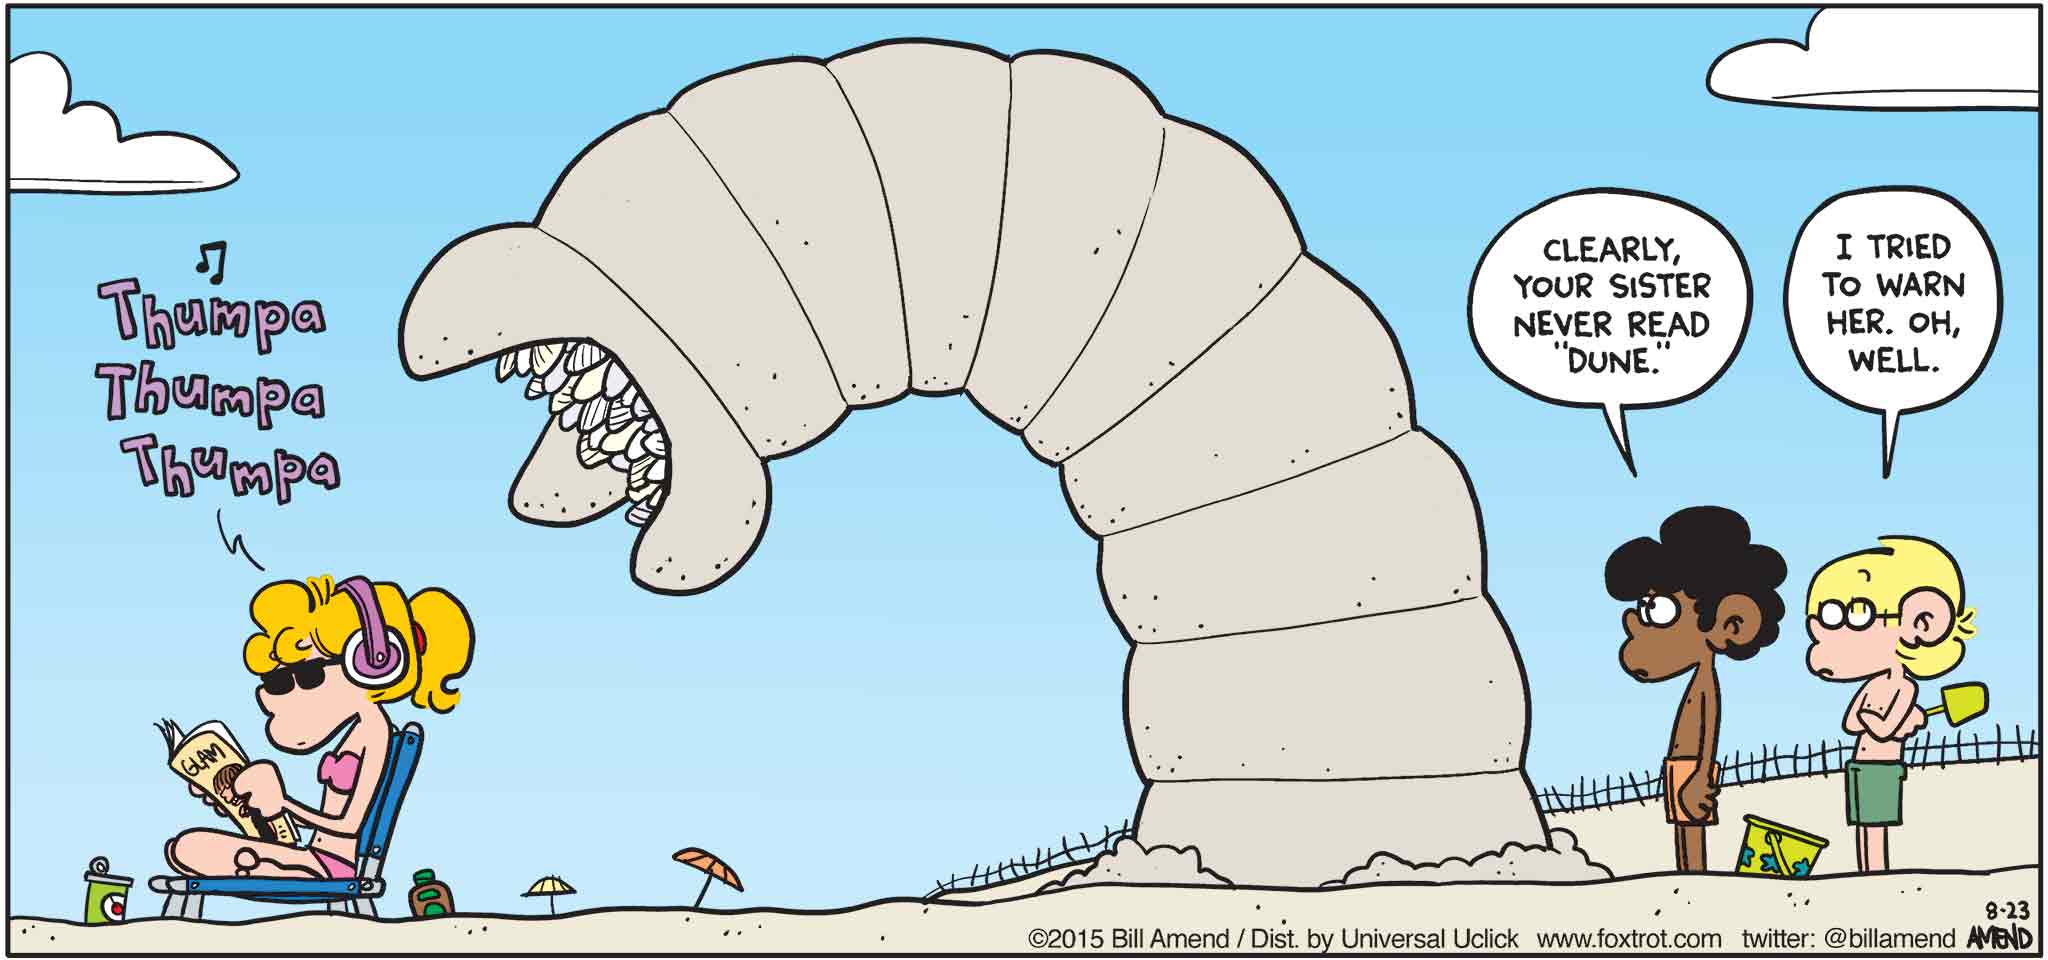 FoxTrot by Bill Amend - "Watch Out For Sandworms" published August 23, 2015 - Marcus: Clearly, your sister never read "Dune." Jason: I tried to warn her. Oh, well.